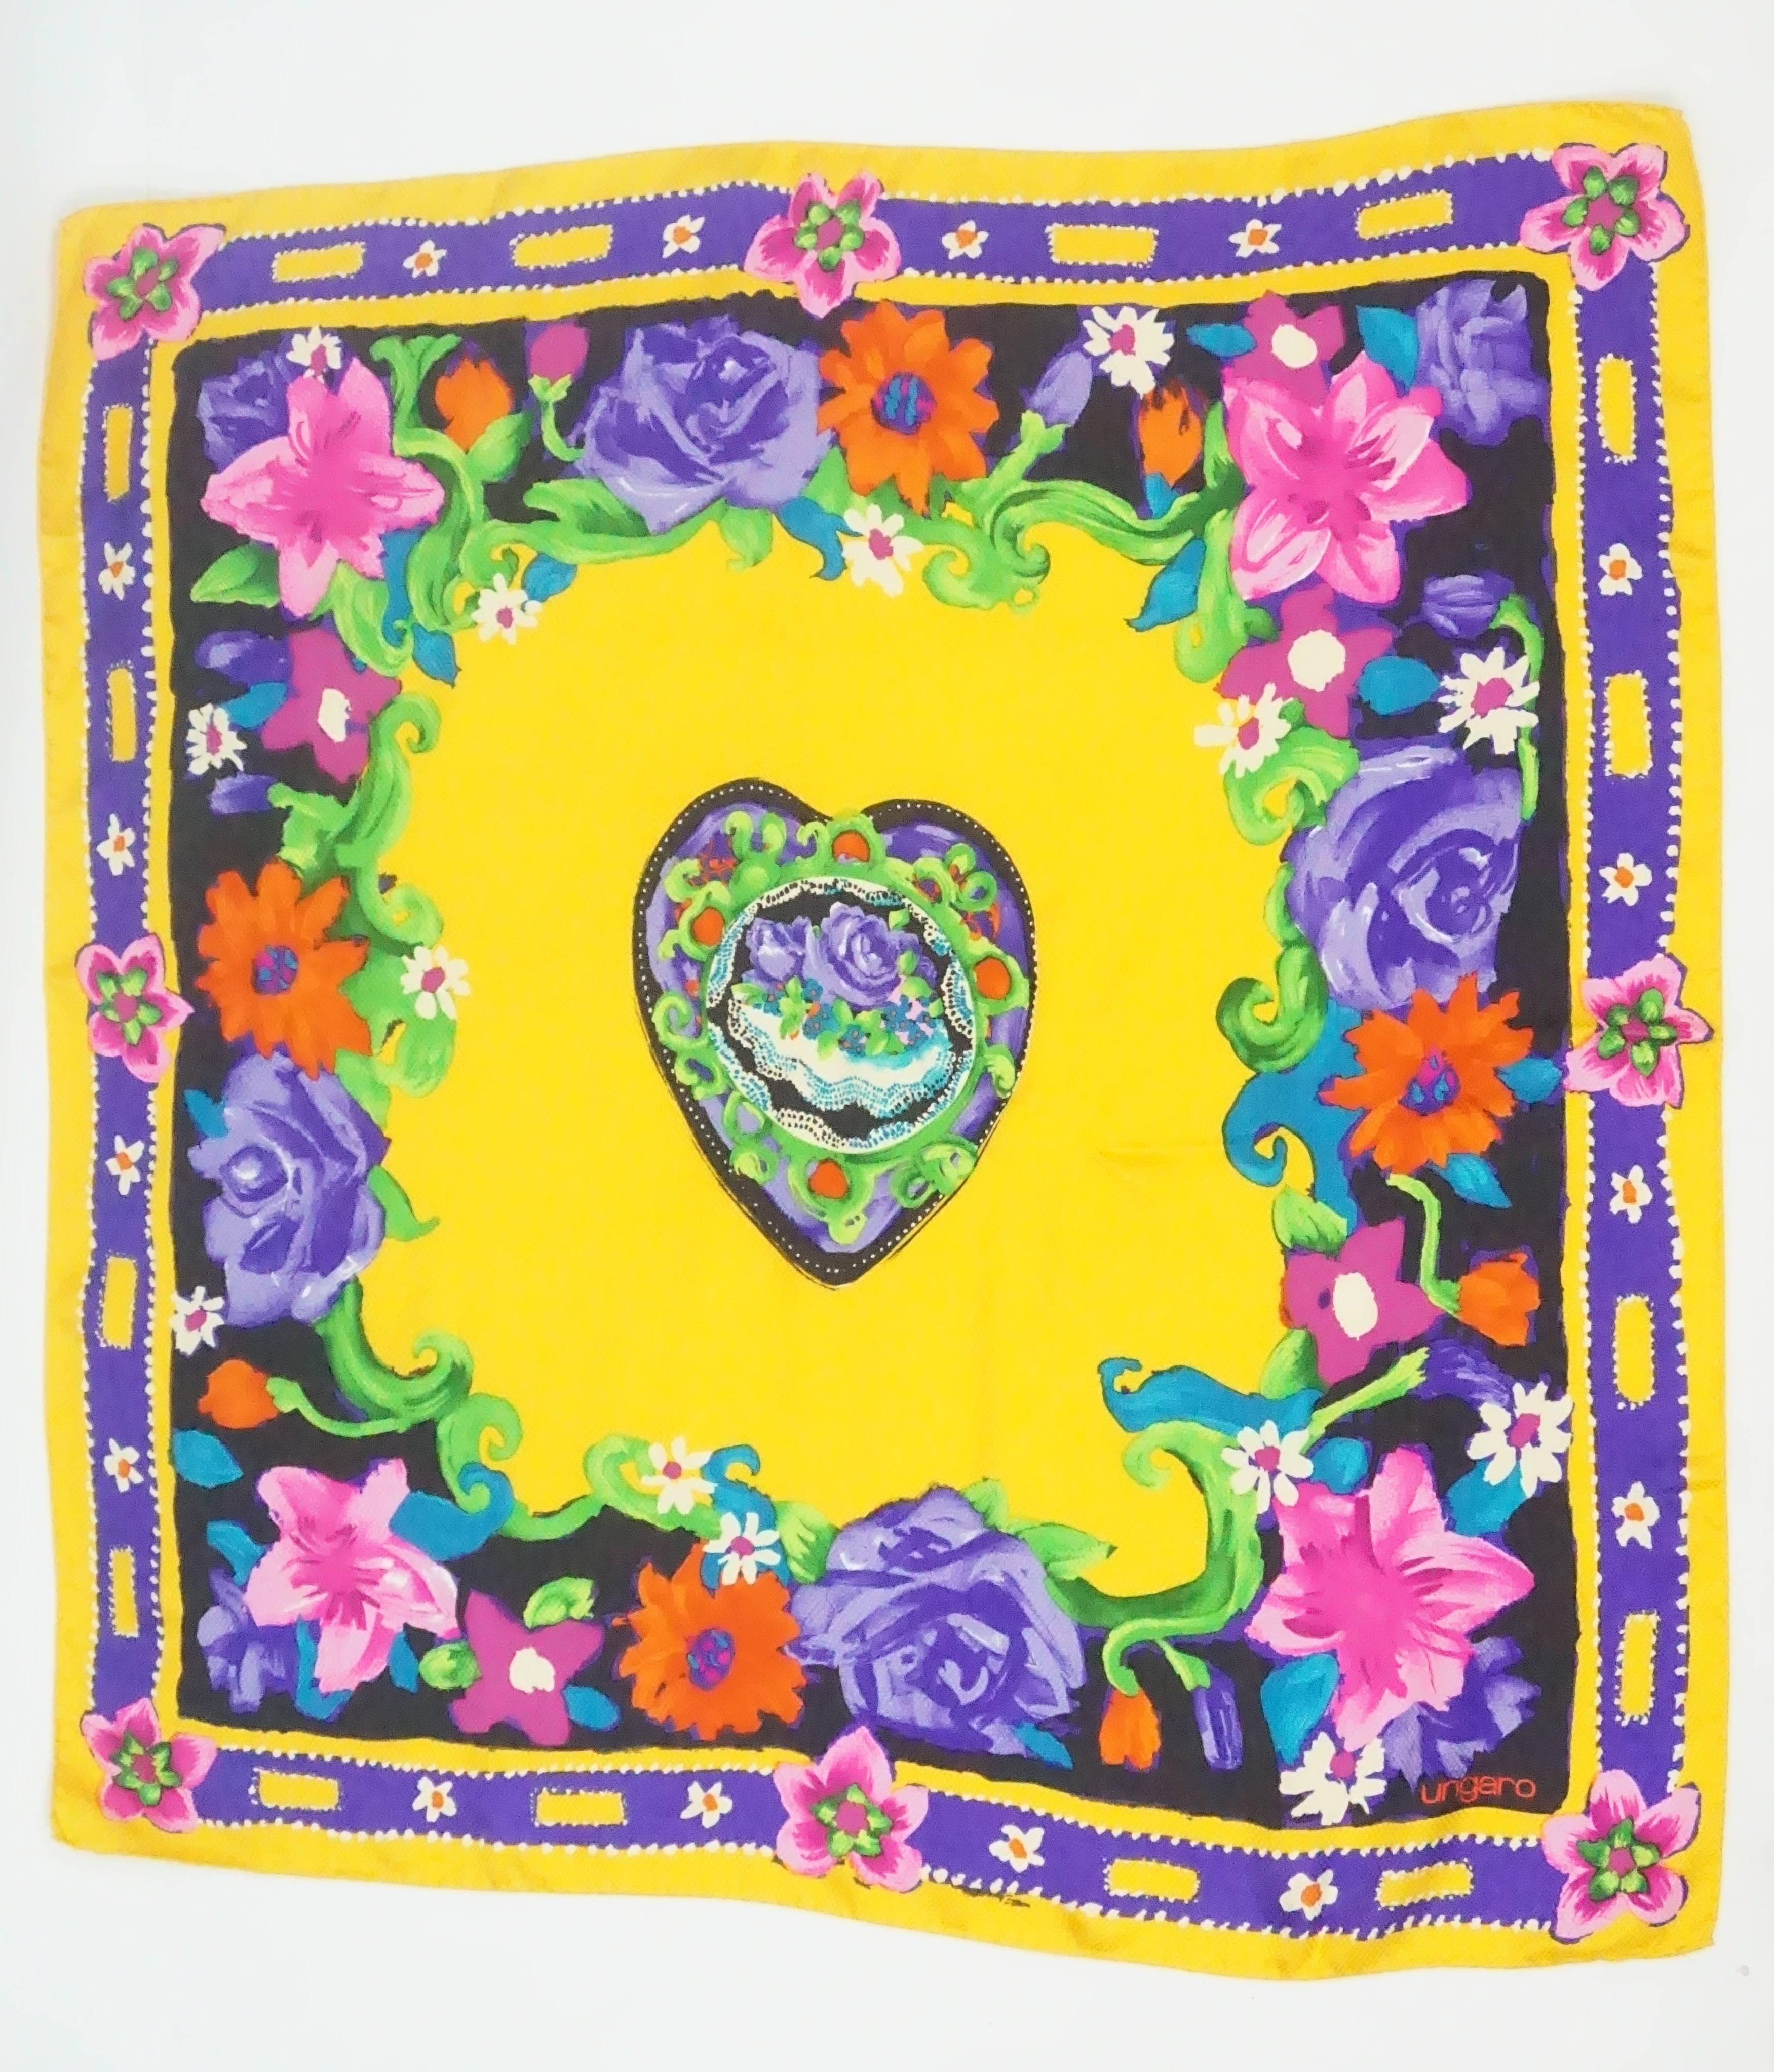 Emanuel Ungaro Multi Floral Print Textured Silk Scarf  This Ungaro silk scarf is a mixture of bright yellow, purple, pink, green, orange, and blue colors. There is a floral print throughout with a heart in the middle that has intricate designs